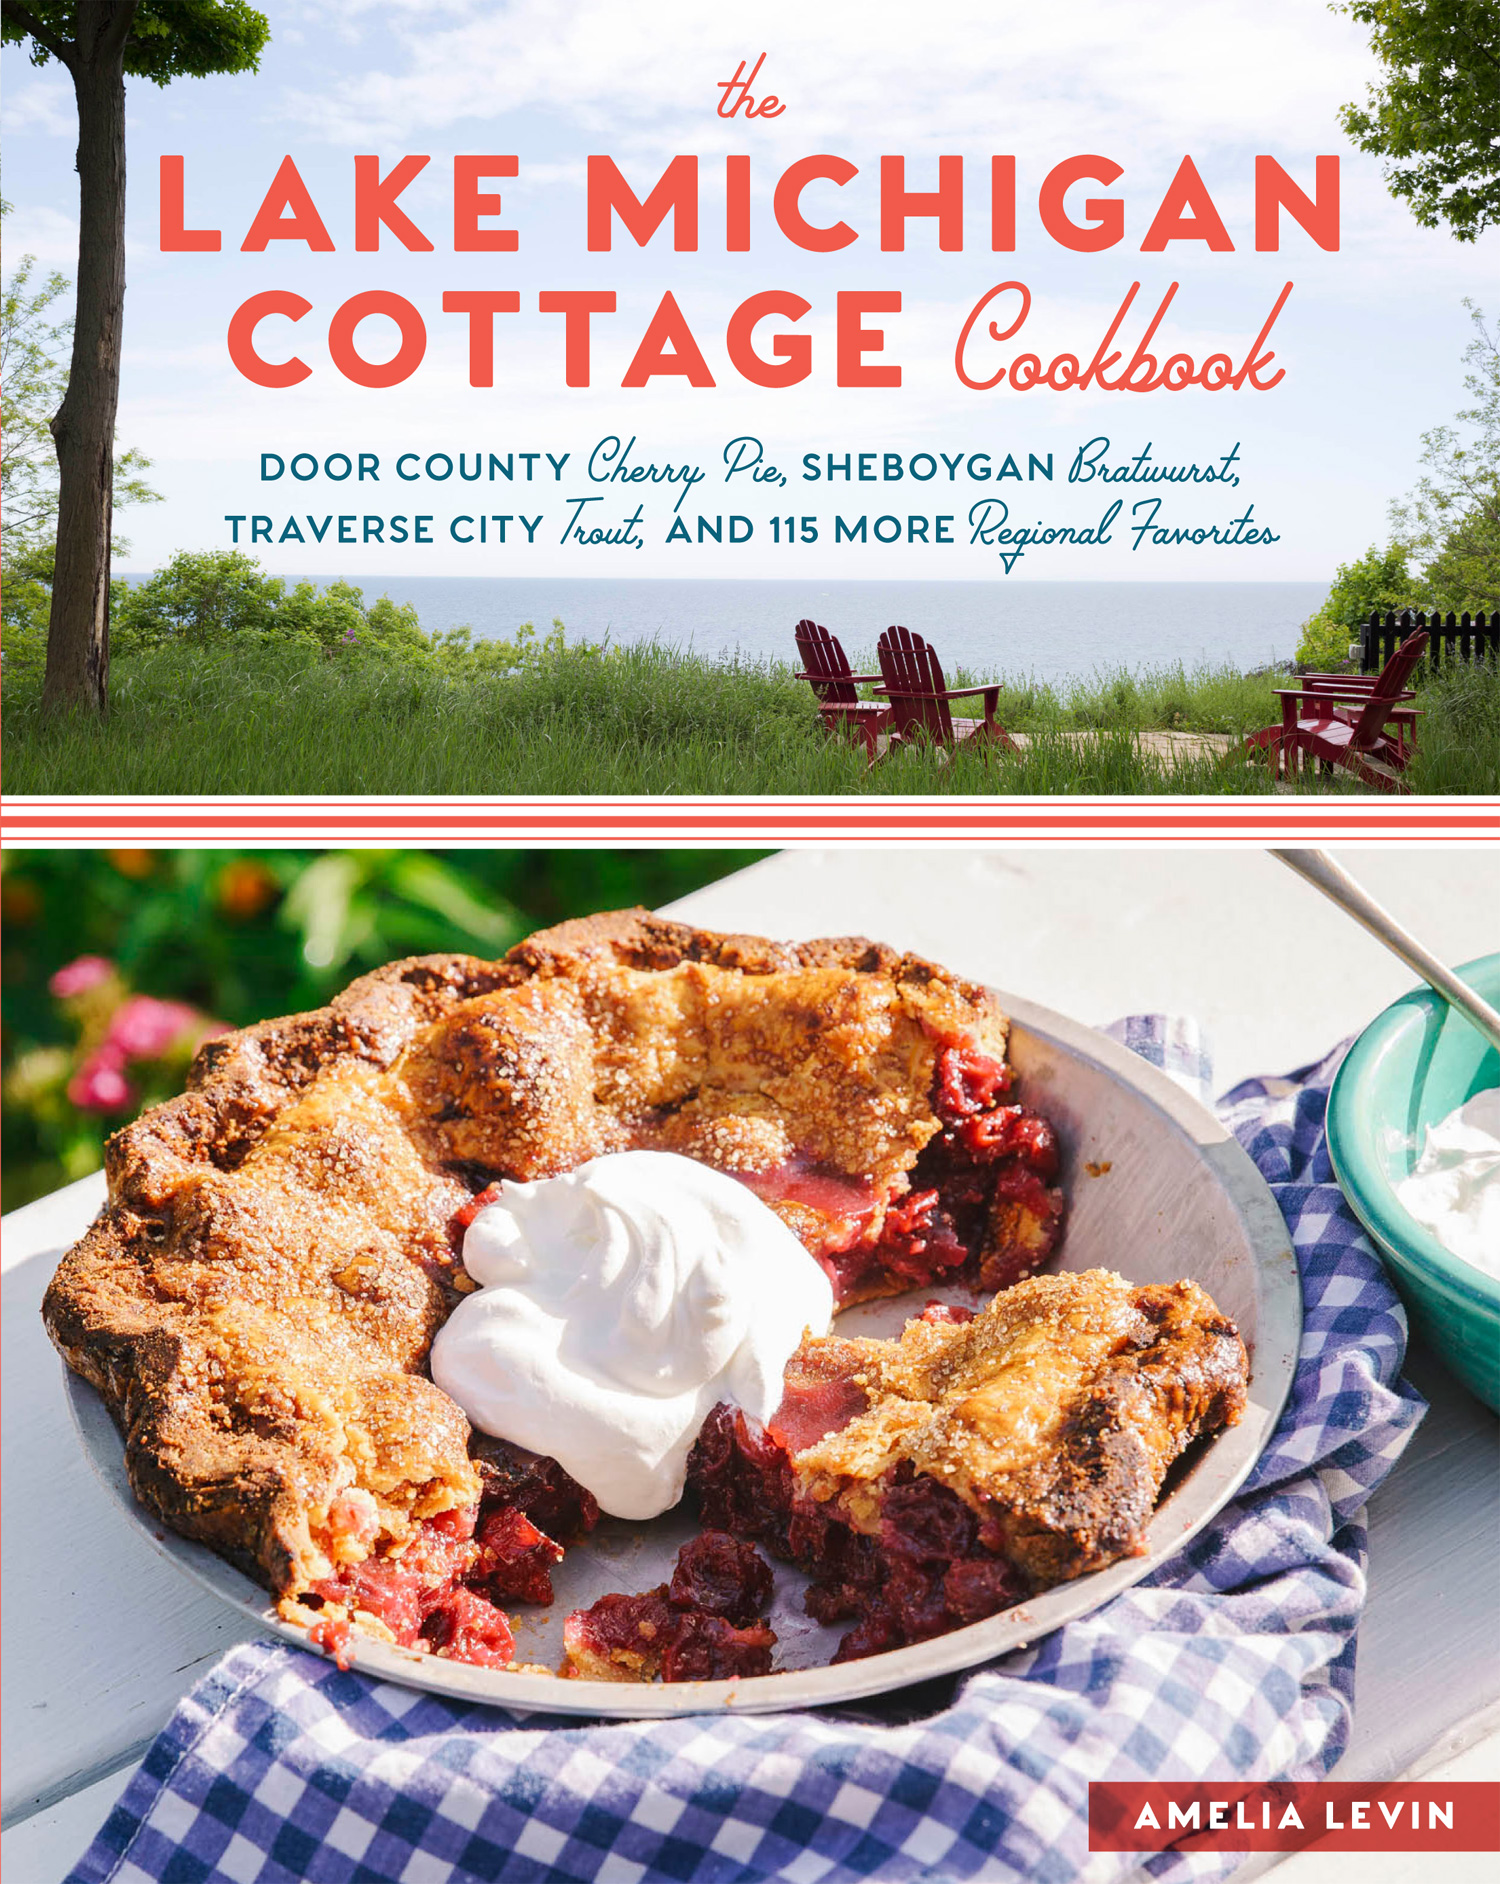  Excerpted from The Lake Michigan Cottage Cookbook Copyright Teri Genovese (top) and Johnny Autry (bottom). Used with permission from Storey Publishing. 